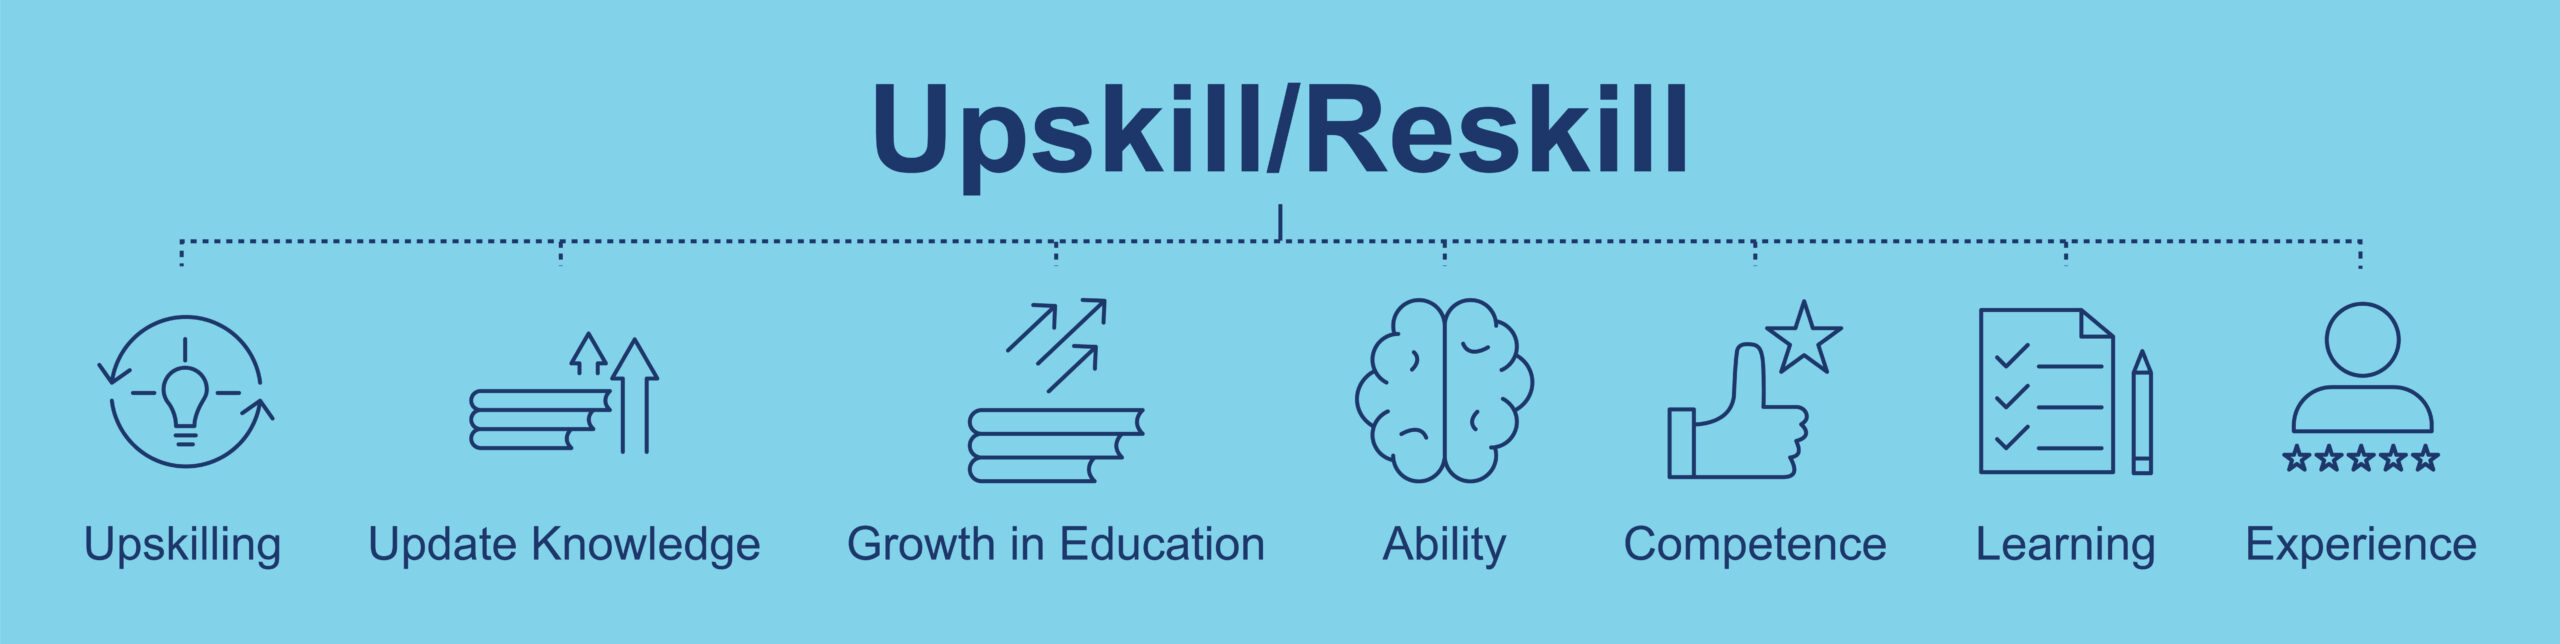 Upskilling and reskilling infographic